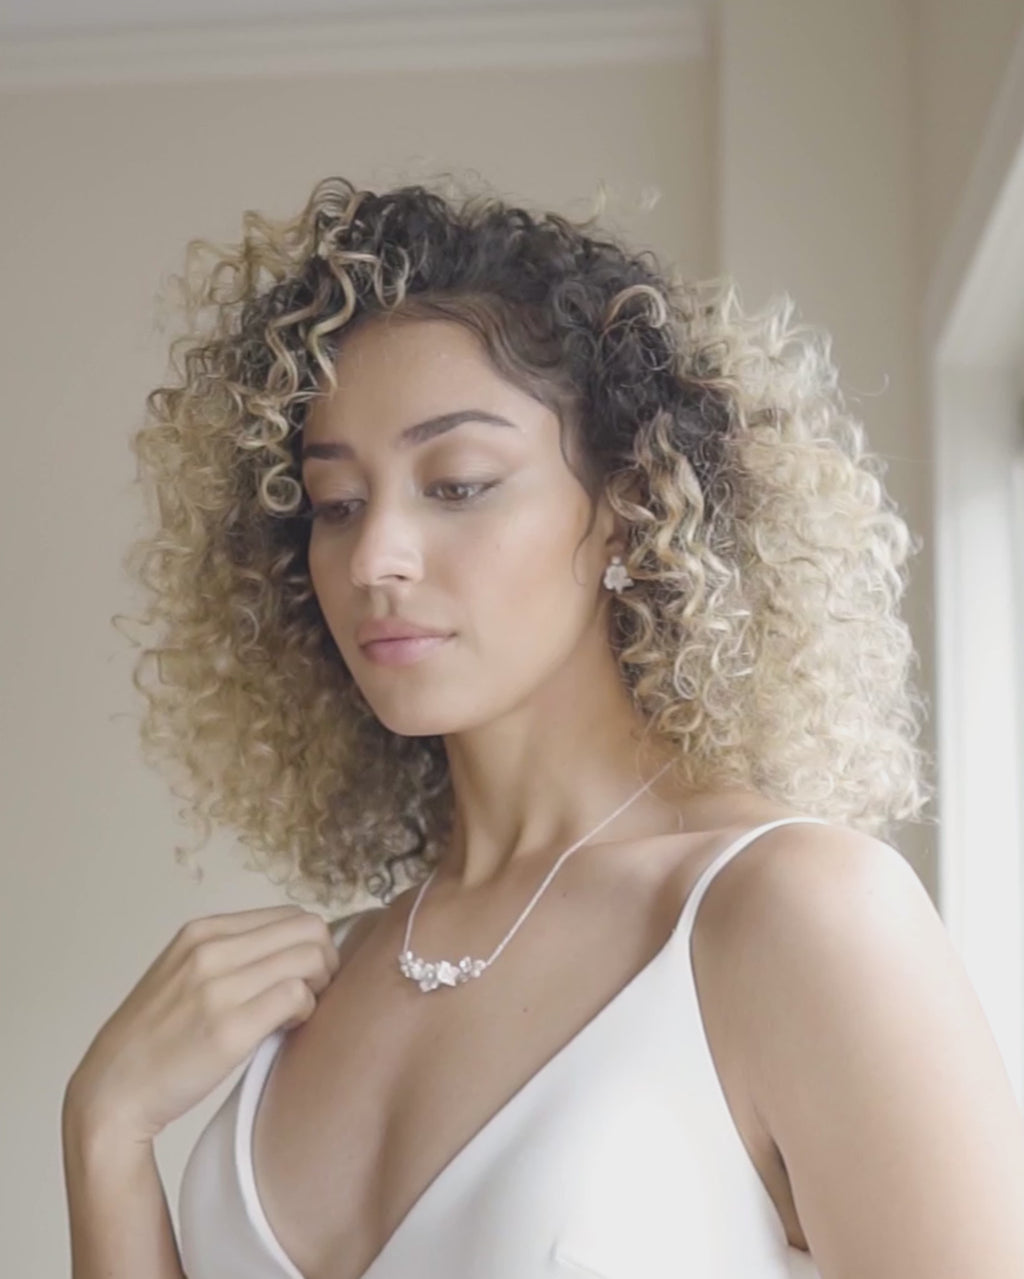 Video of a model wearing the Belle Fleur Necklace paired with the Belle Fleur Cluster Earrings.